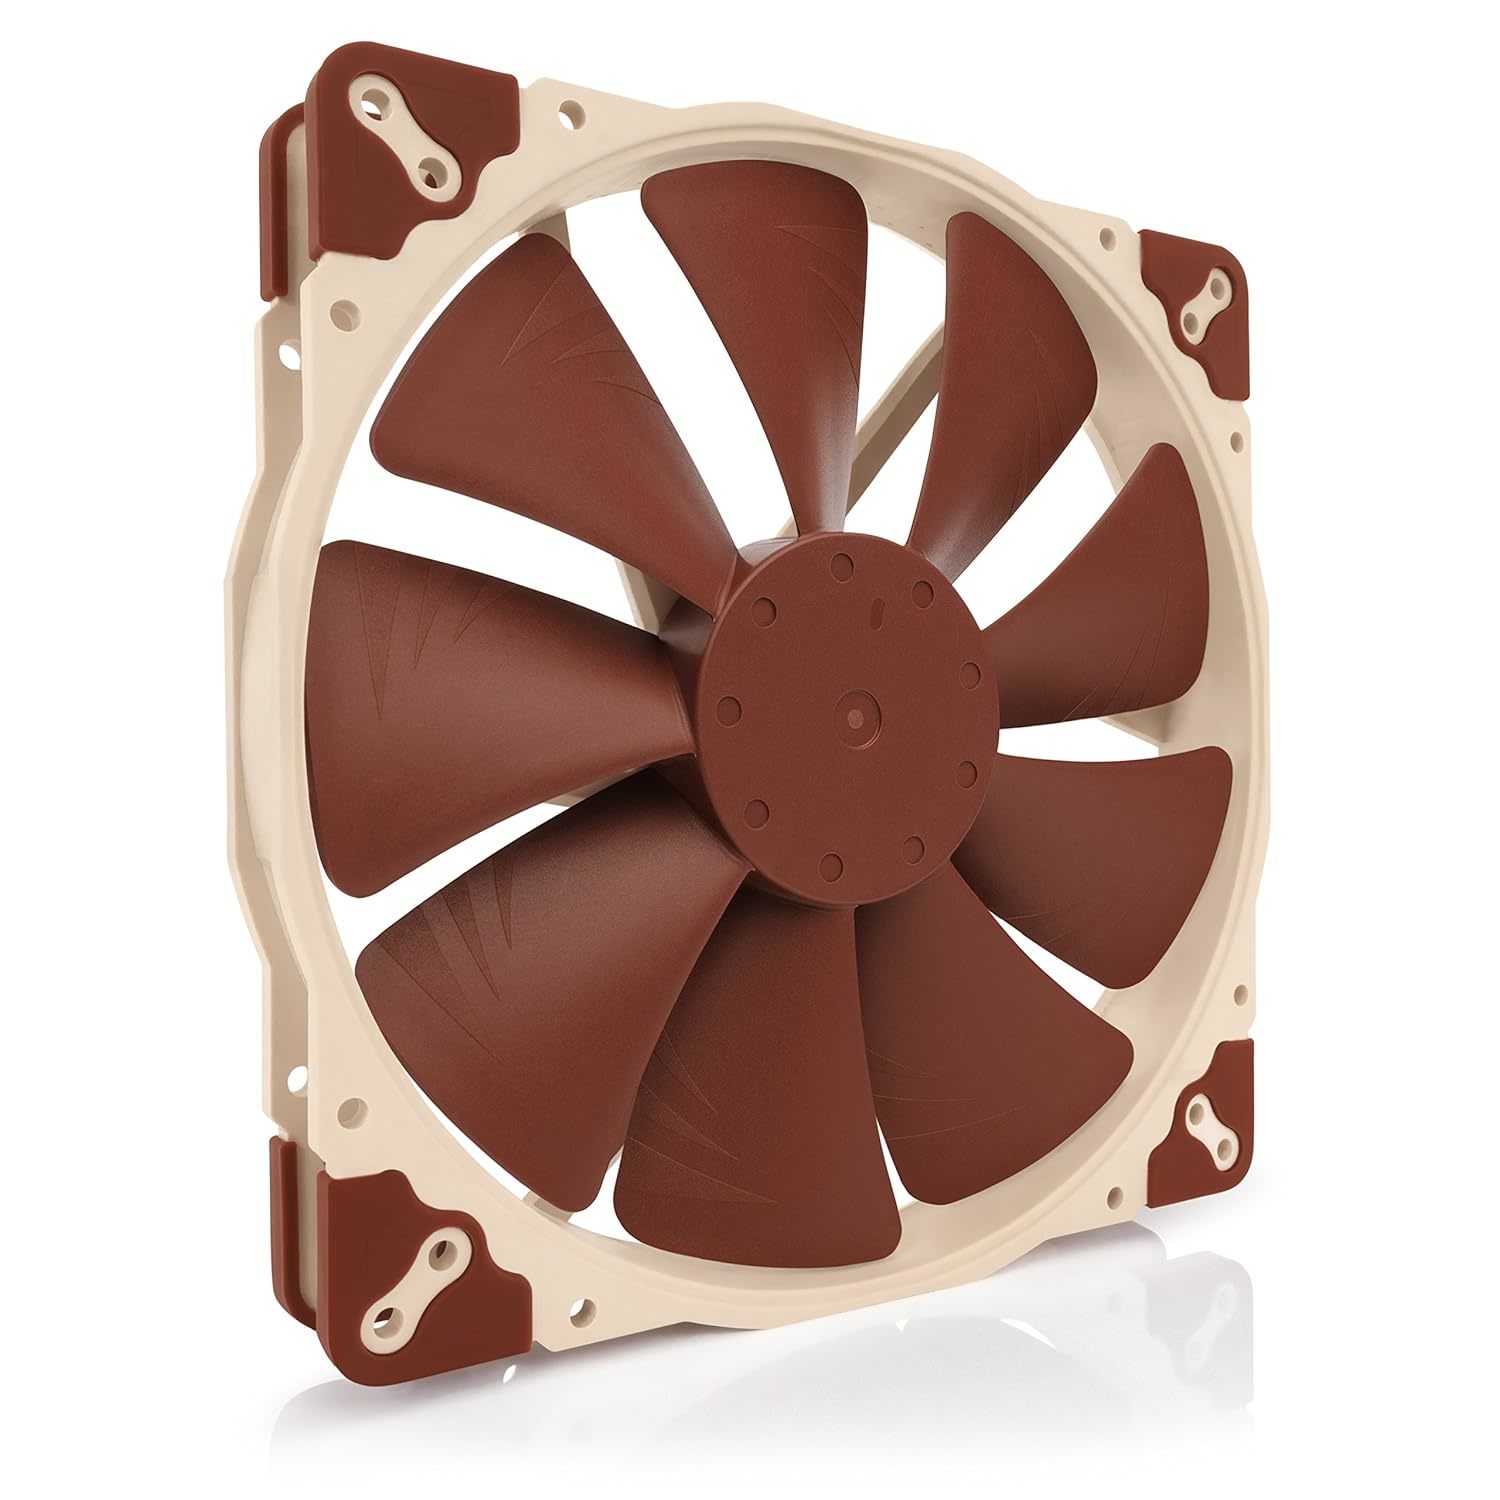 Primary image for Noctua NF-A20 PWM, Premium Quiet Fan, 4-Pin (200x30mm, Brown)